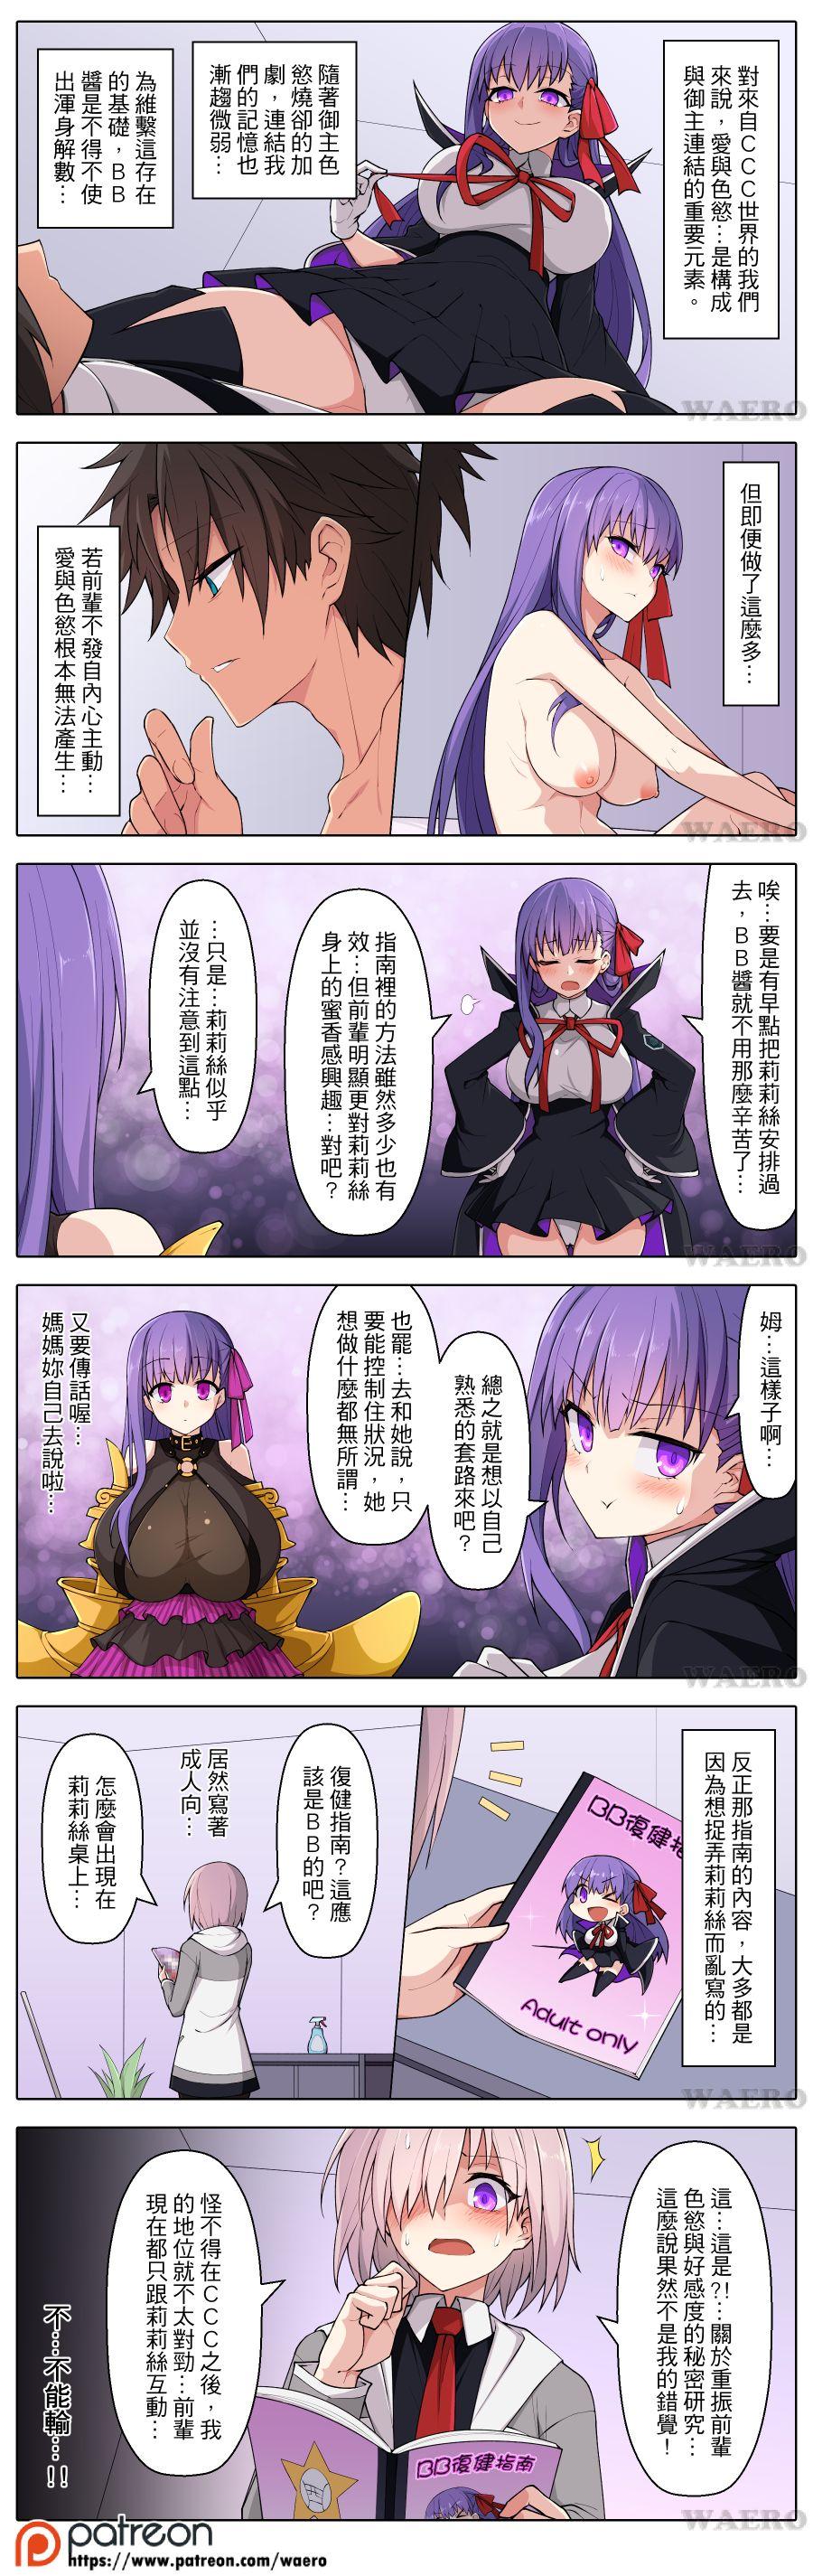 Trans Lust Grand Order - Fate grand order Best - Page 4